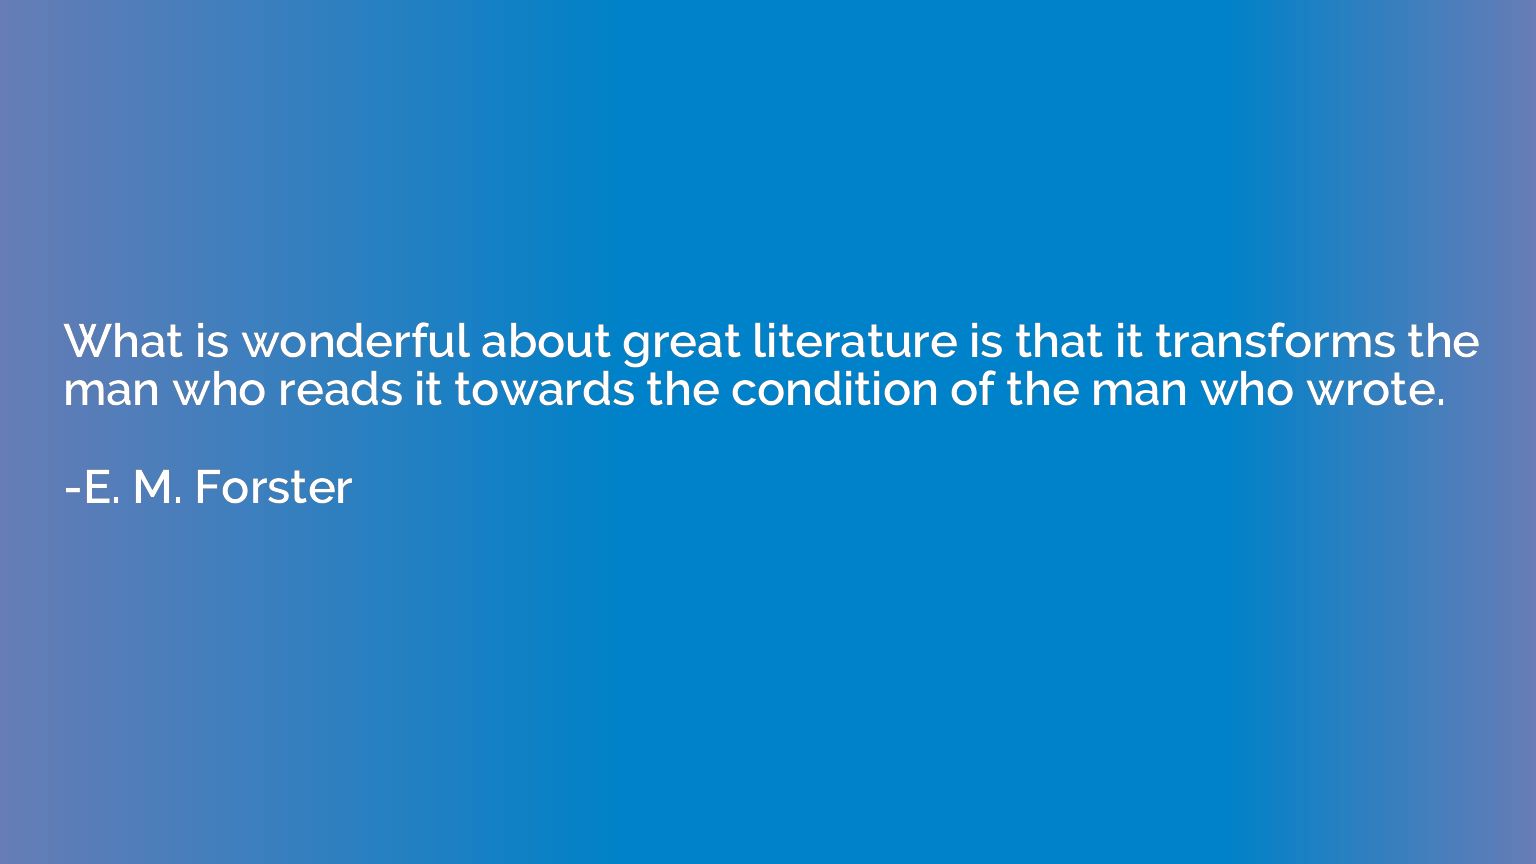 What is wonderful about great literature is that it transfor